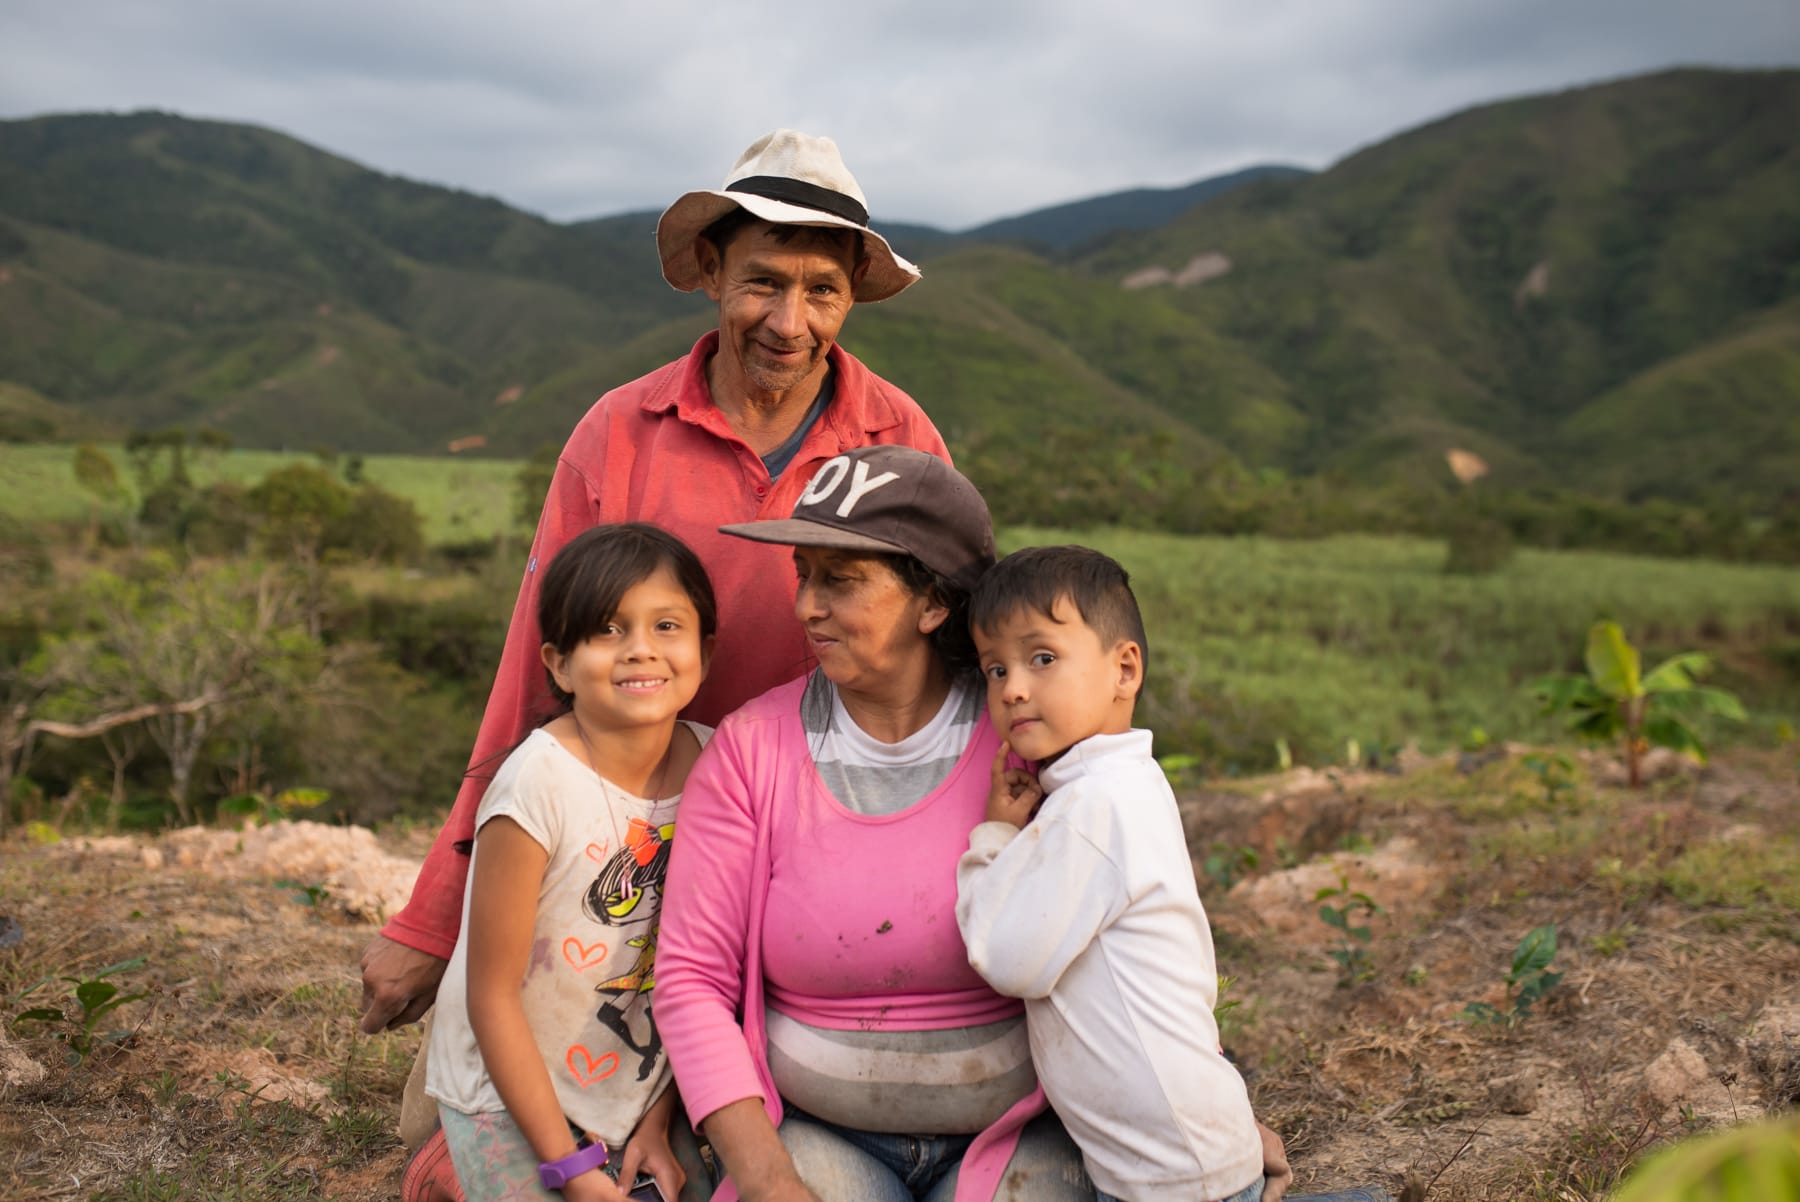 Family in a rural setting in Colombia